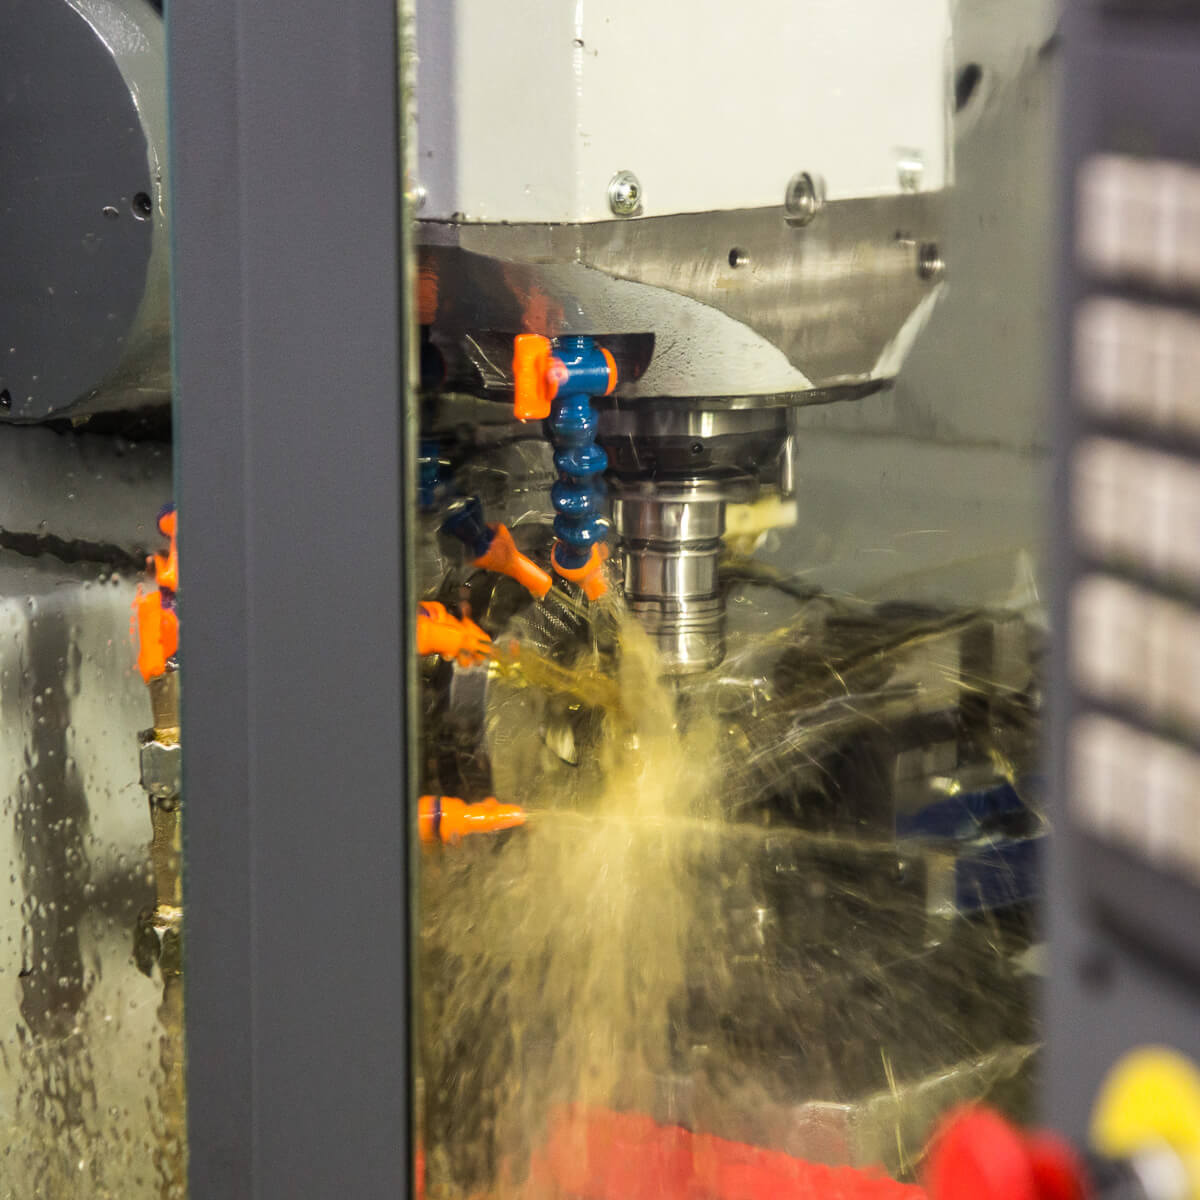 Milling underway in a Valbray five-axis CNC machine